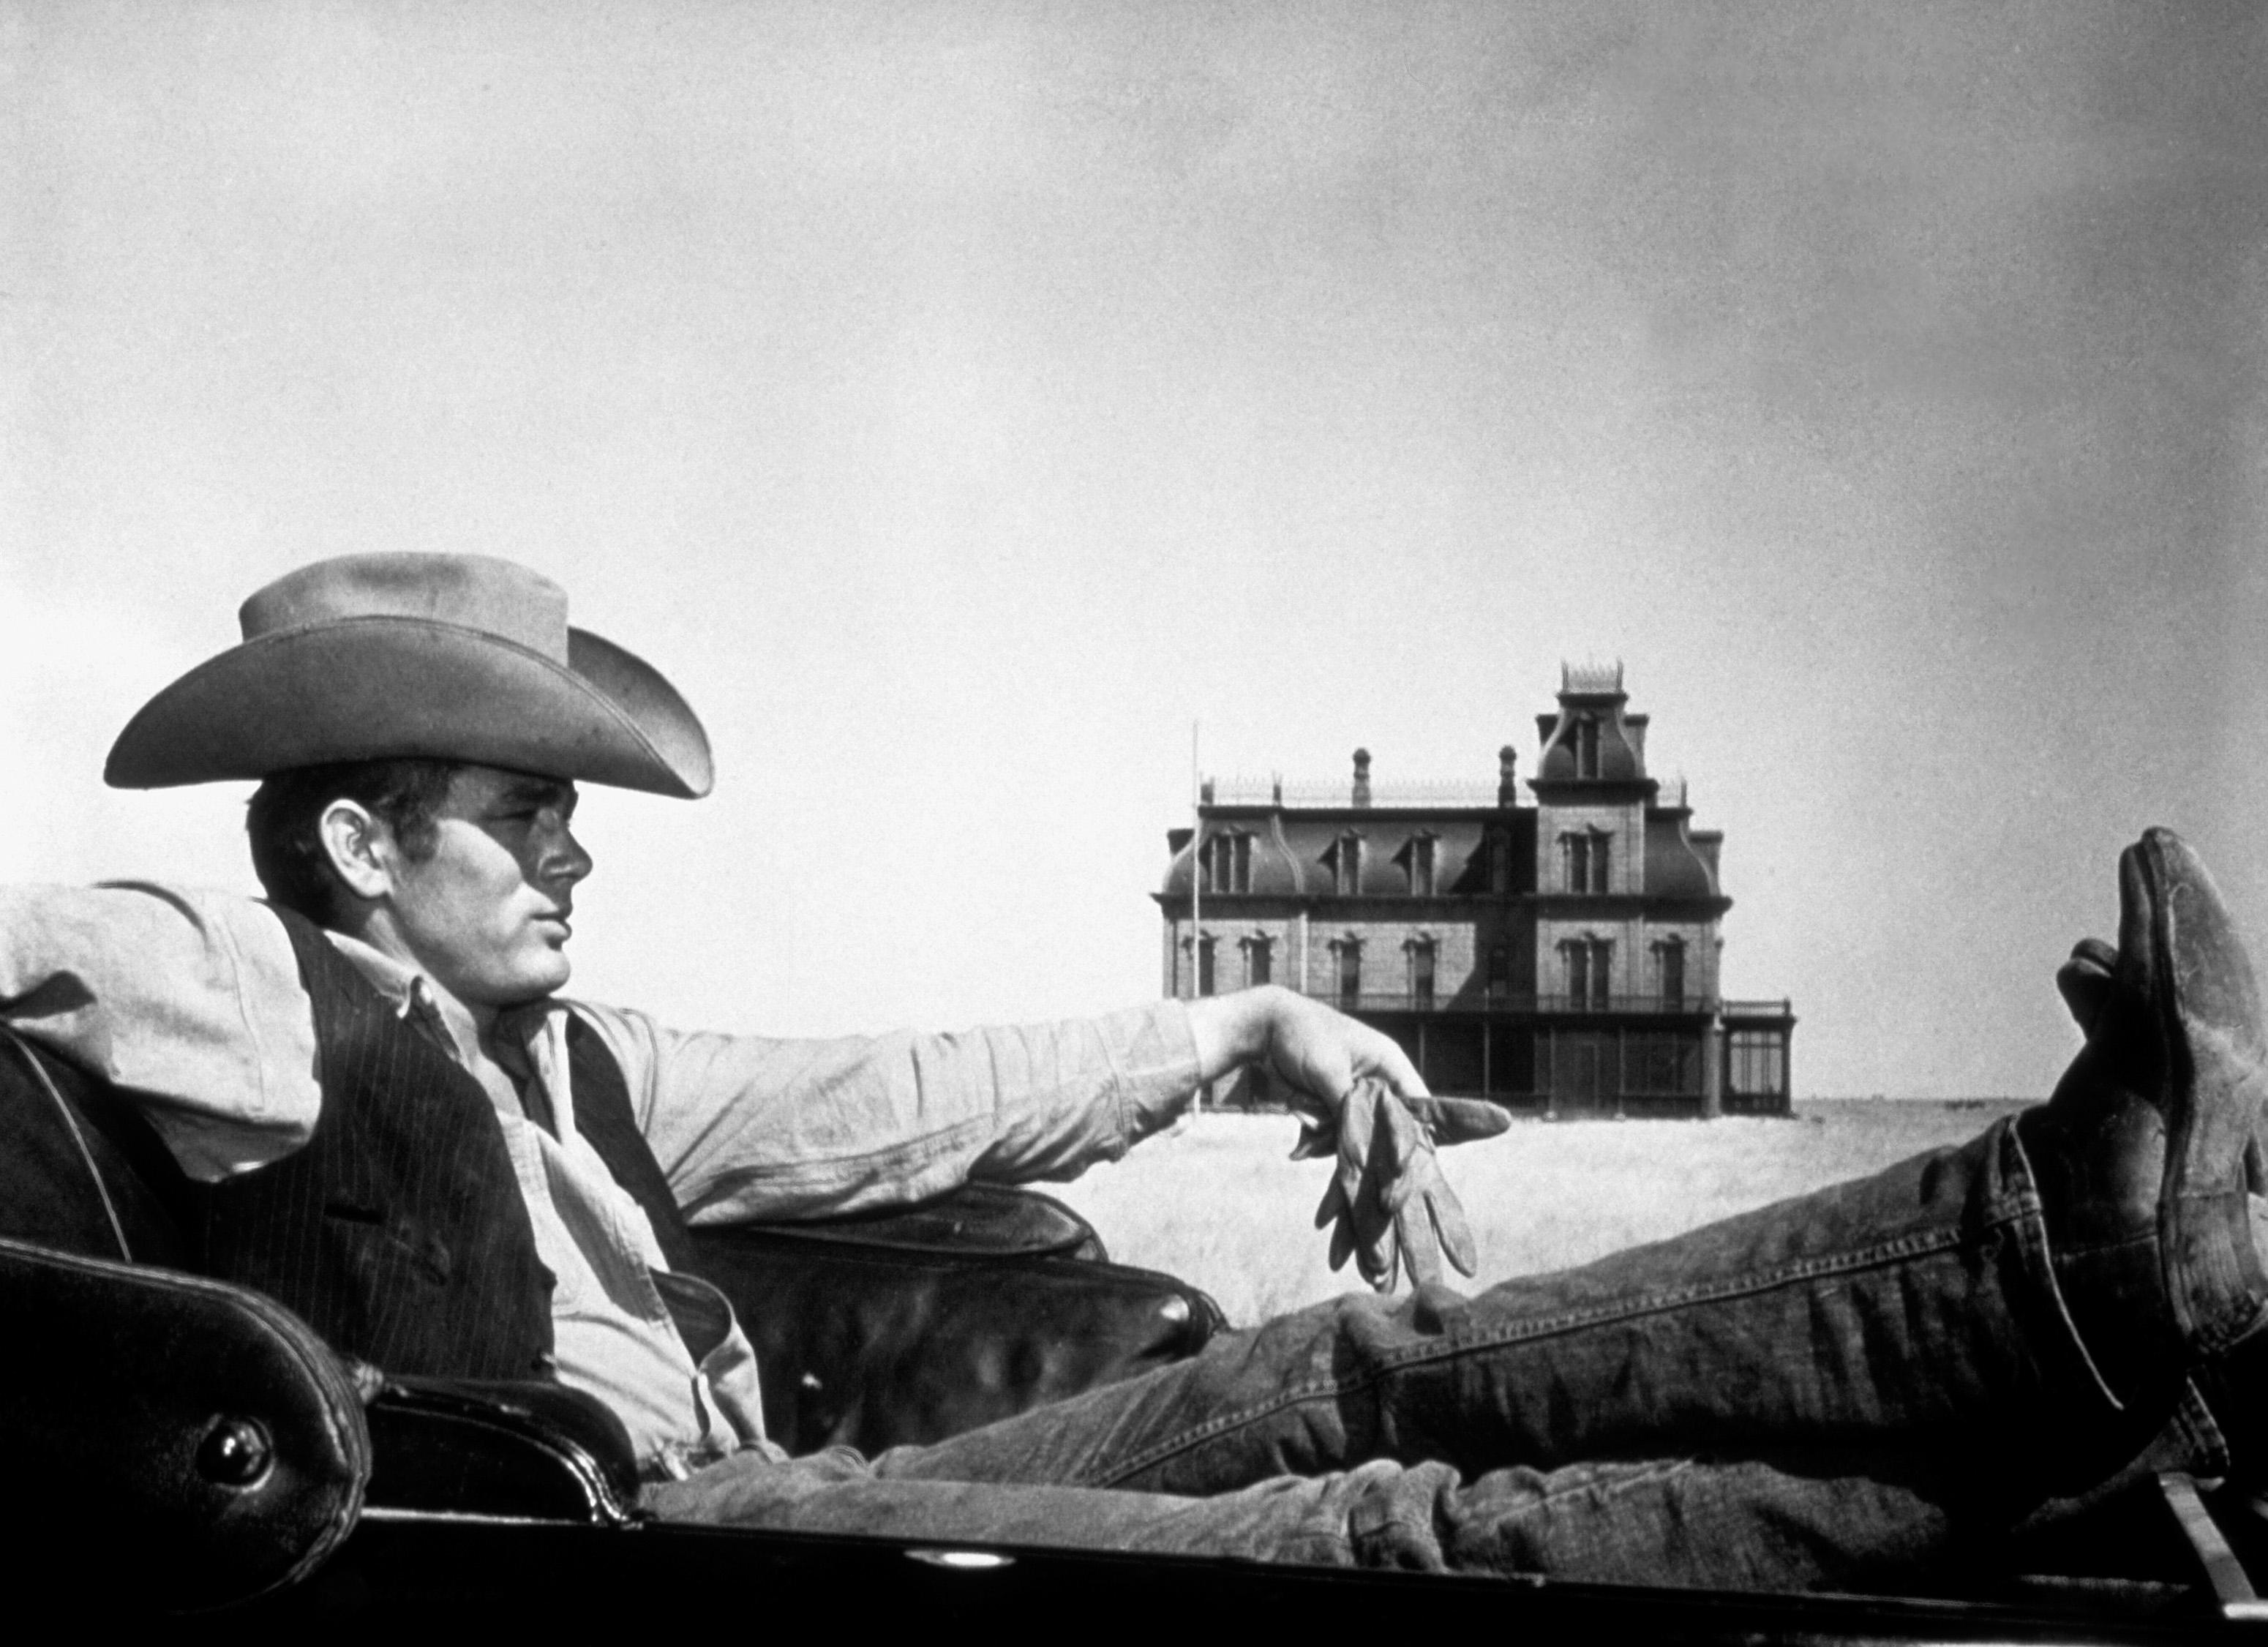 Unknown Black and White Photograph - James Dean Reclining in Giant Globe Photos Fine Art Print